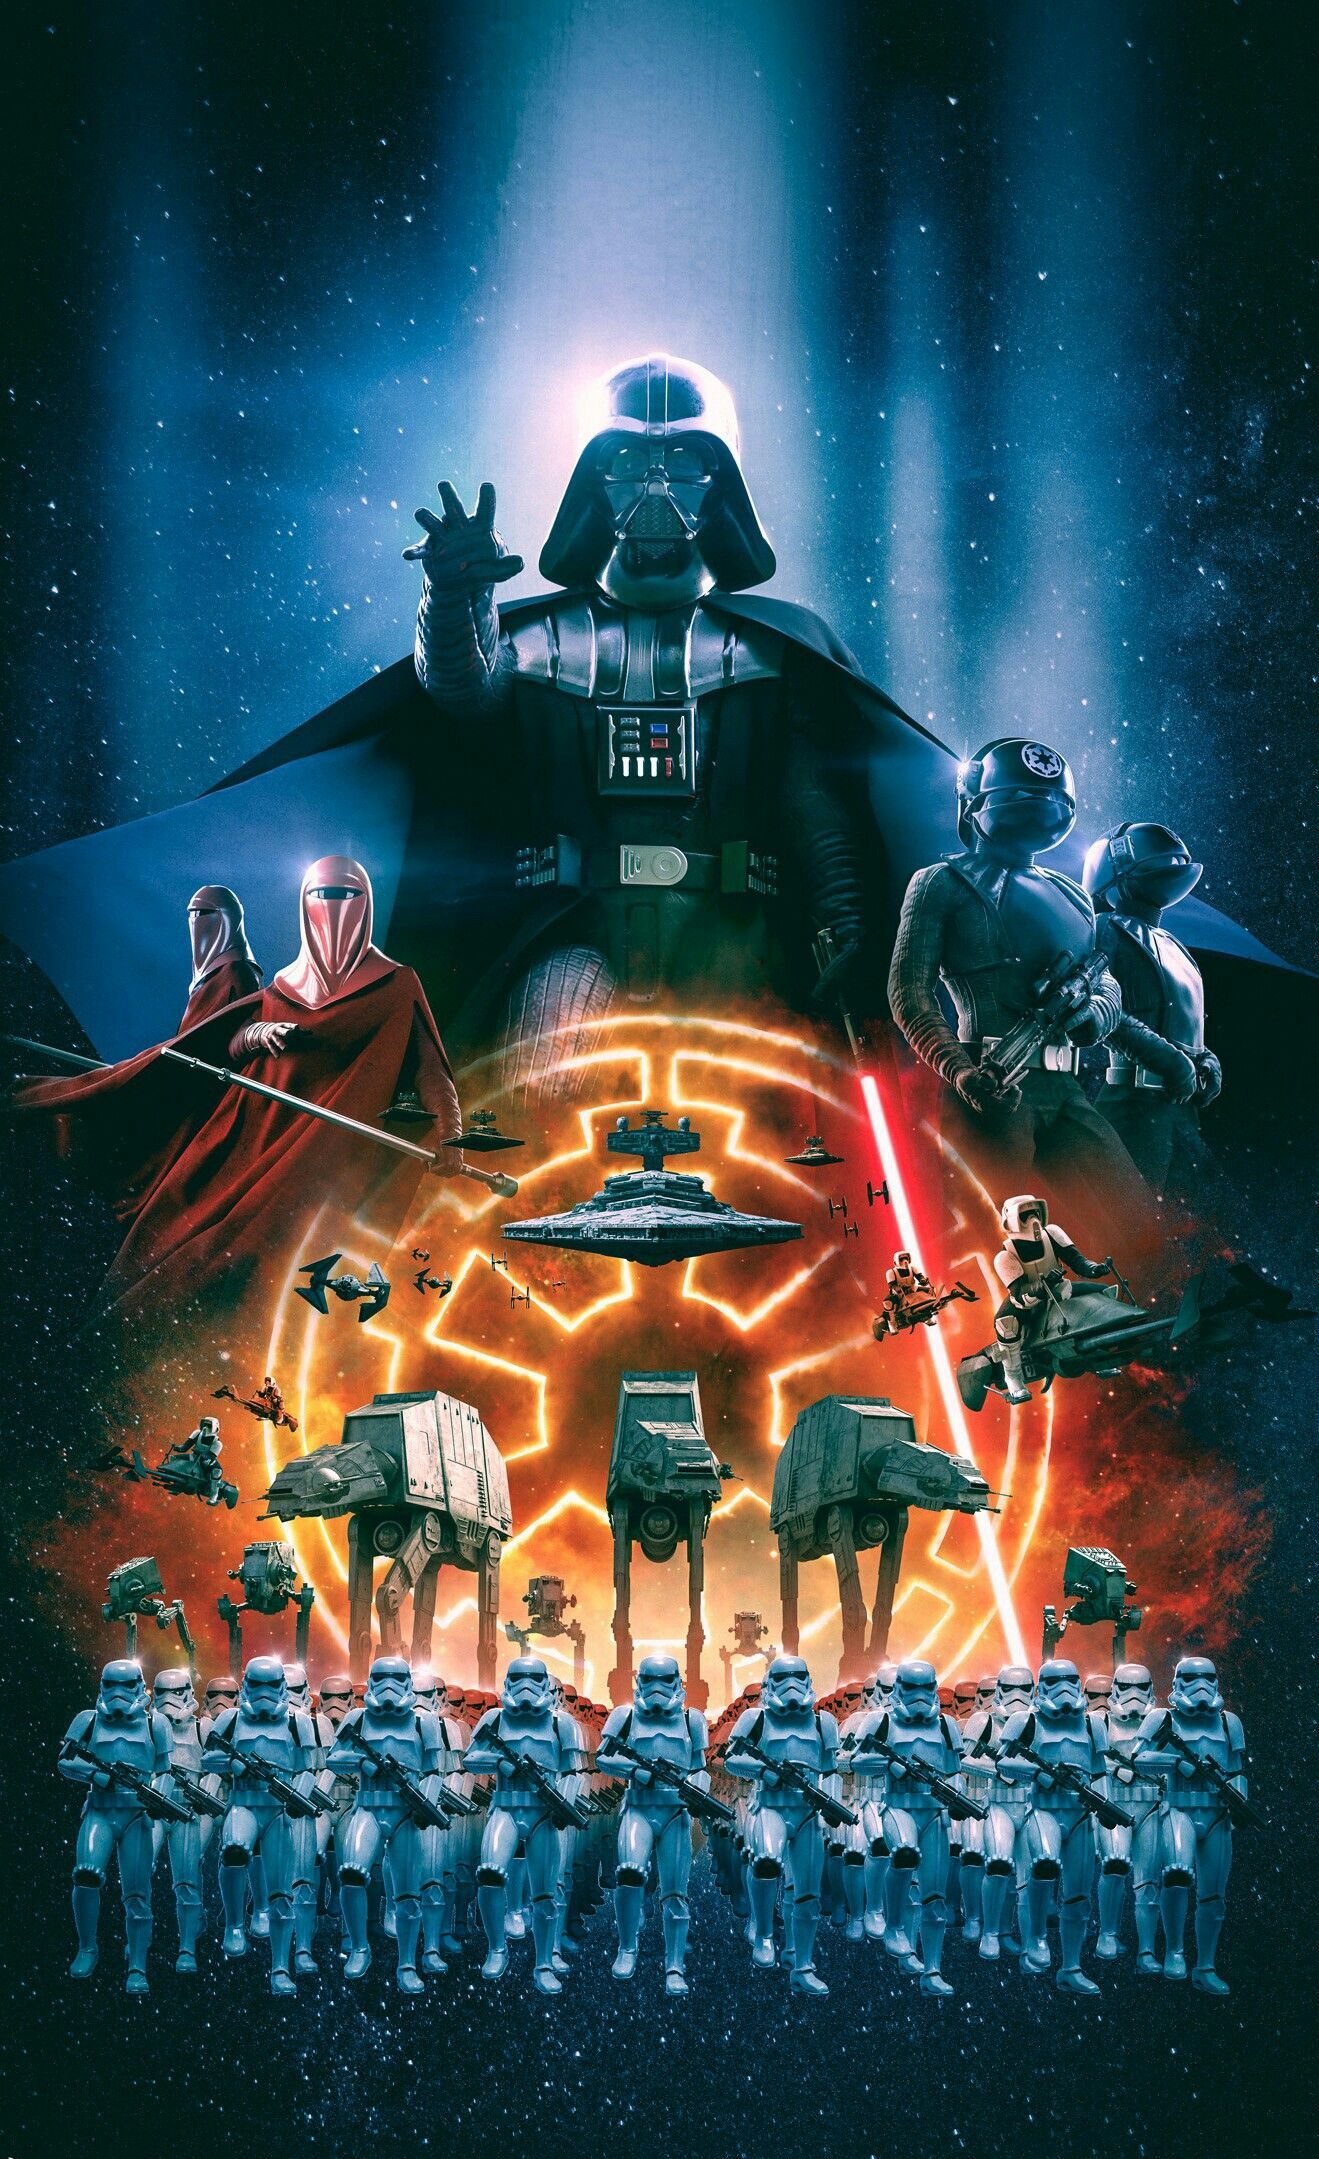 IMPERIAL MARCH. Star wars image, Star .com